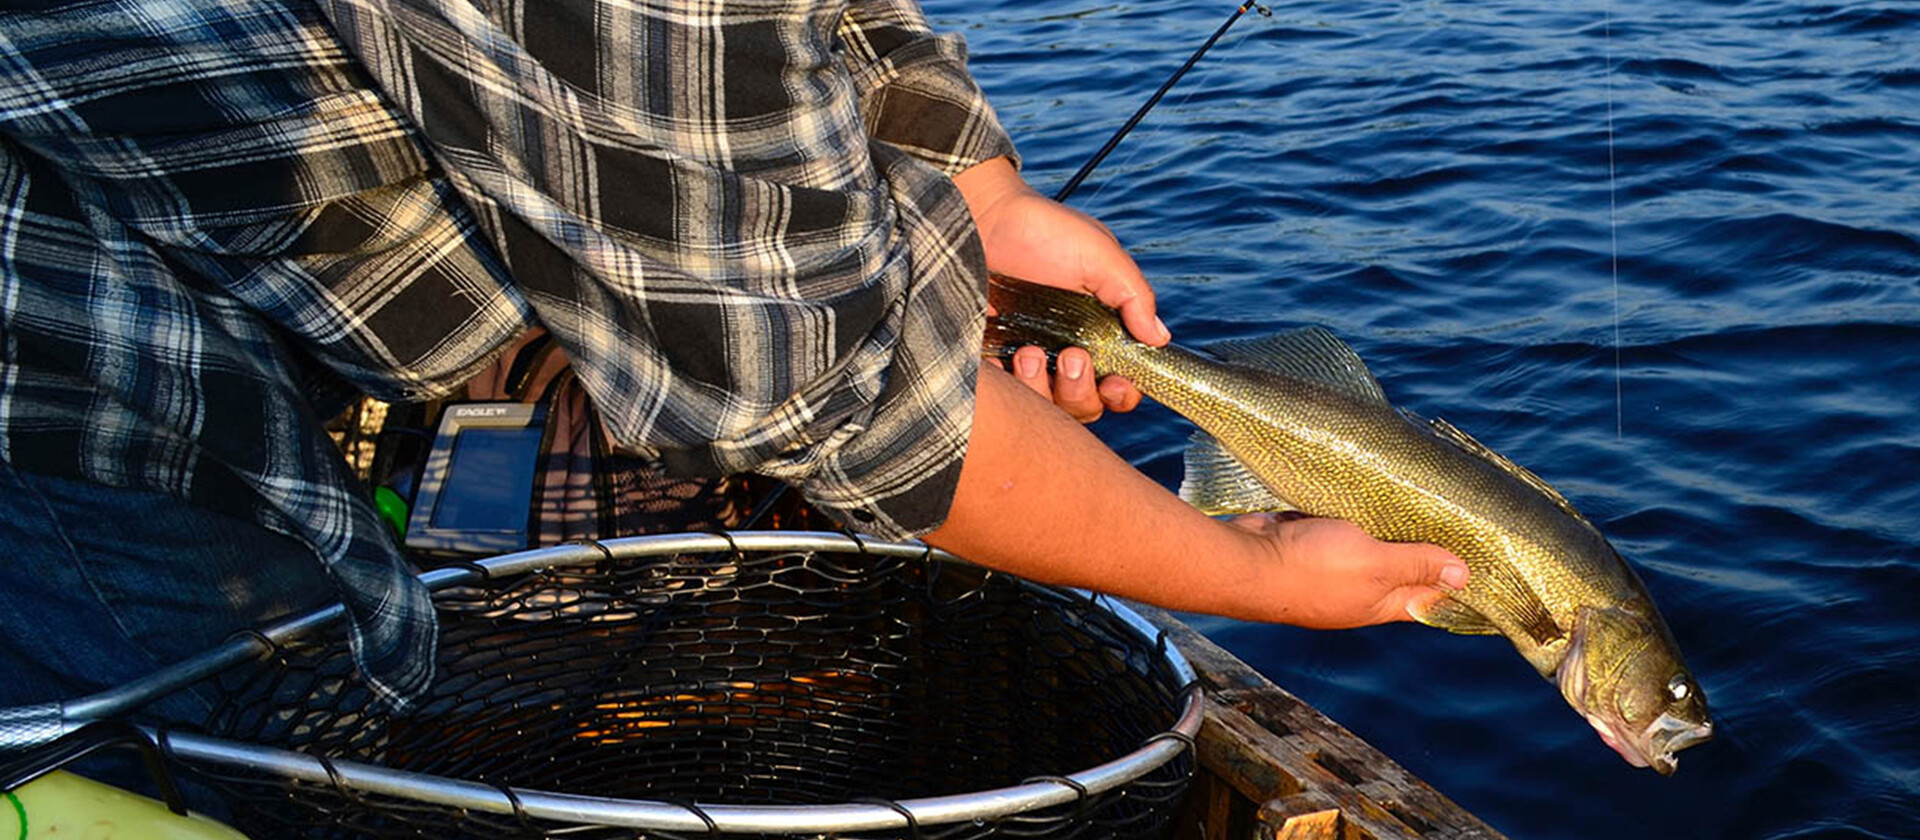 BC Fishing Regulations: 6 Things You Need to Know